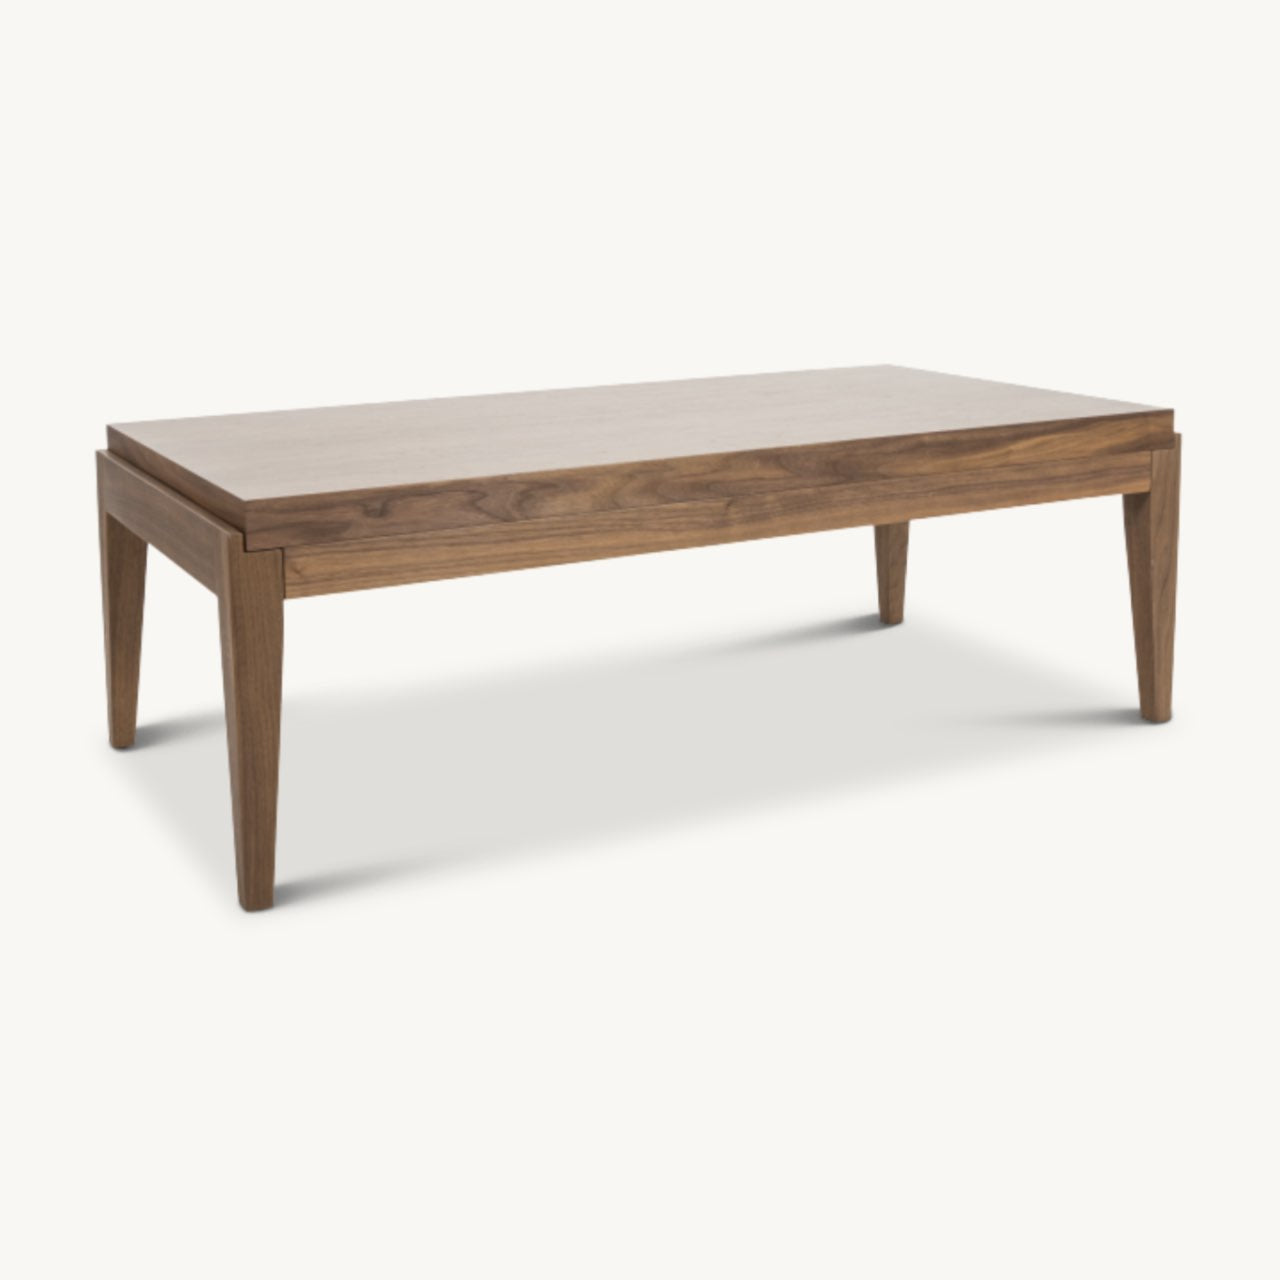 simple low rectangular wooden coffee table